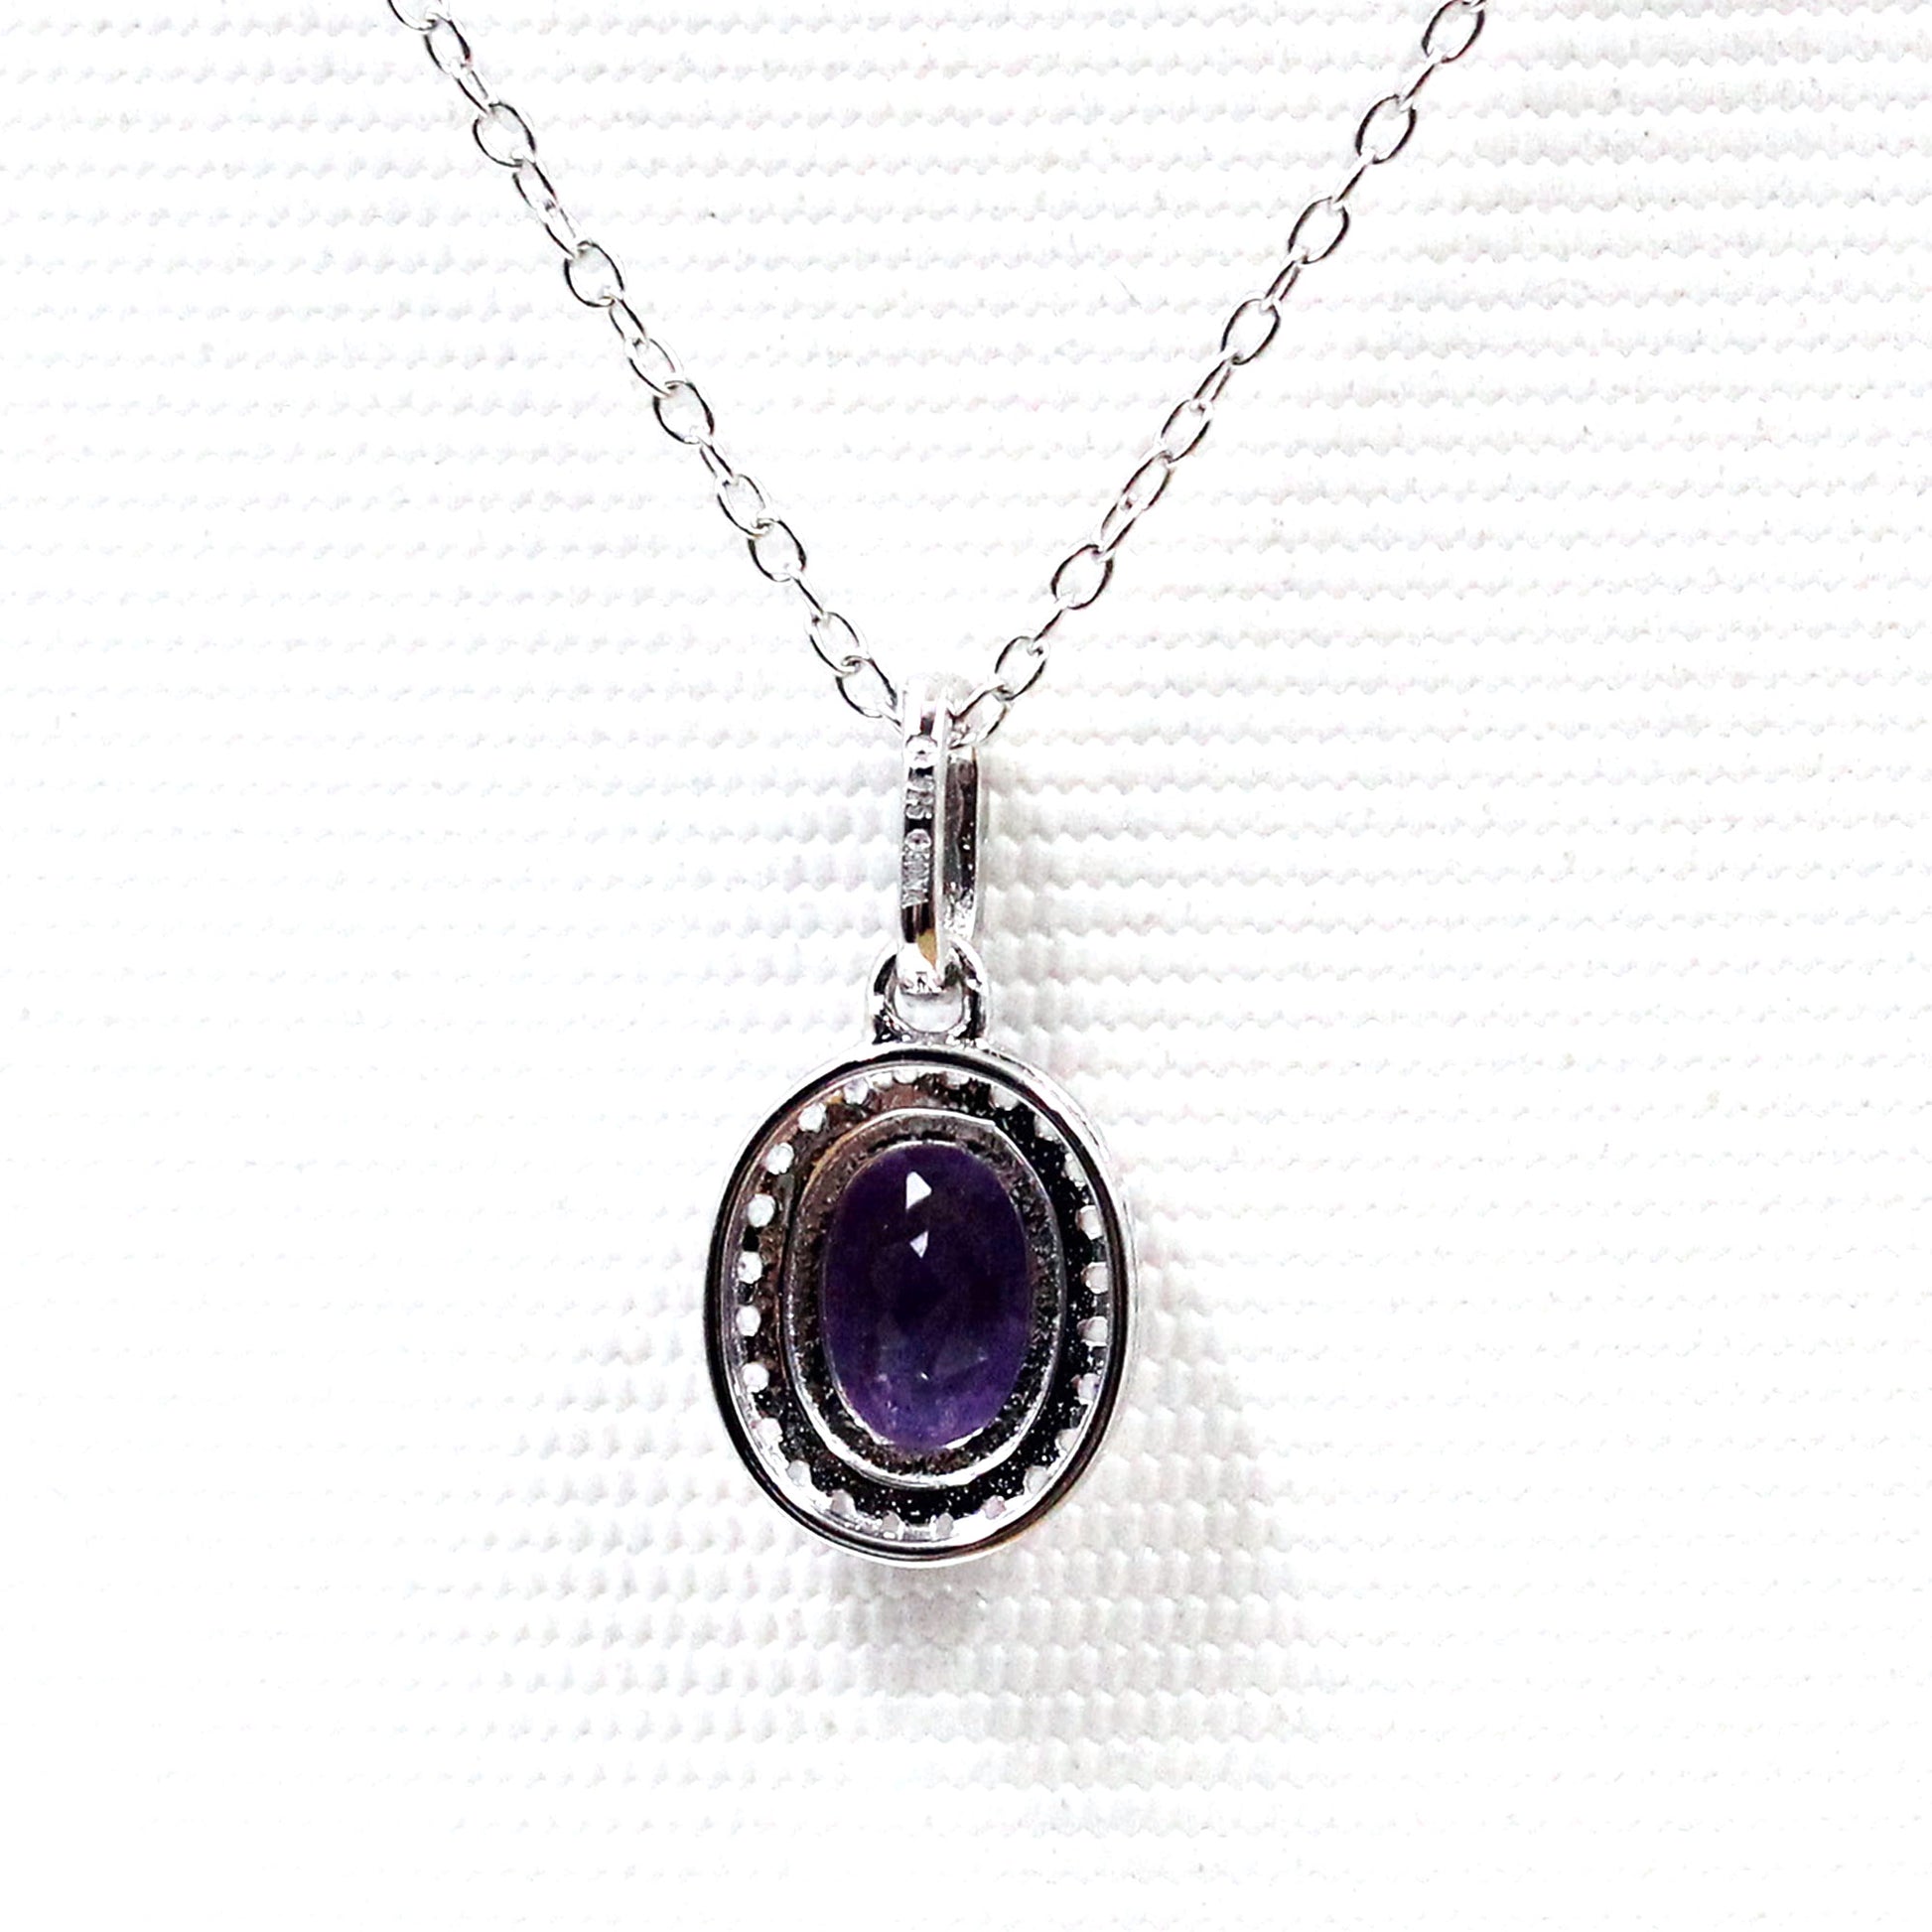 Sterling Silver Oval Amethyst and White Topaz Pendant Necklace, 18" - Pinctore